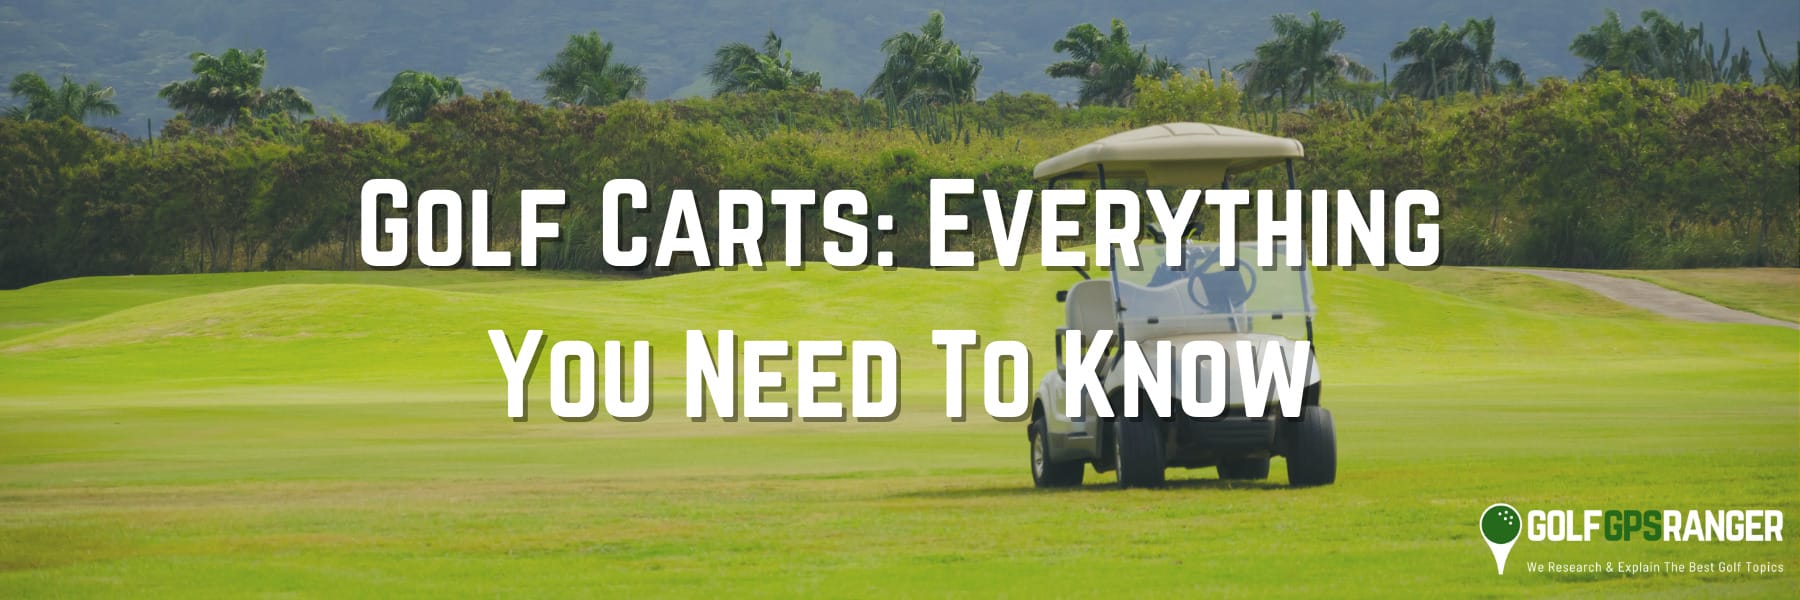 Golf Carts Everything You Need To Know